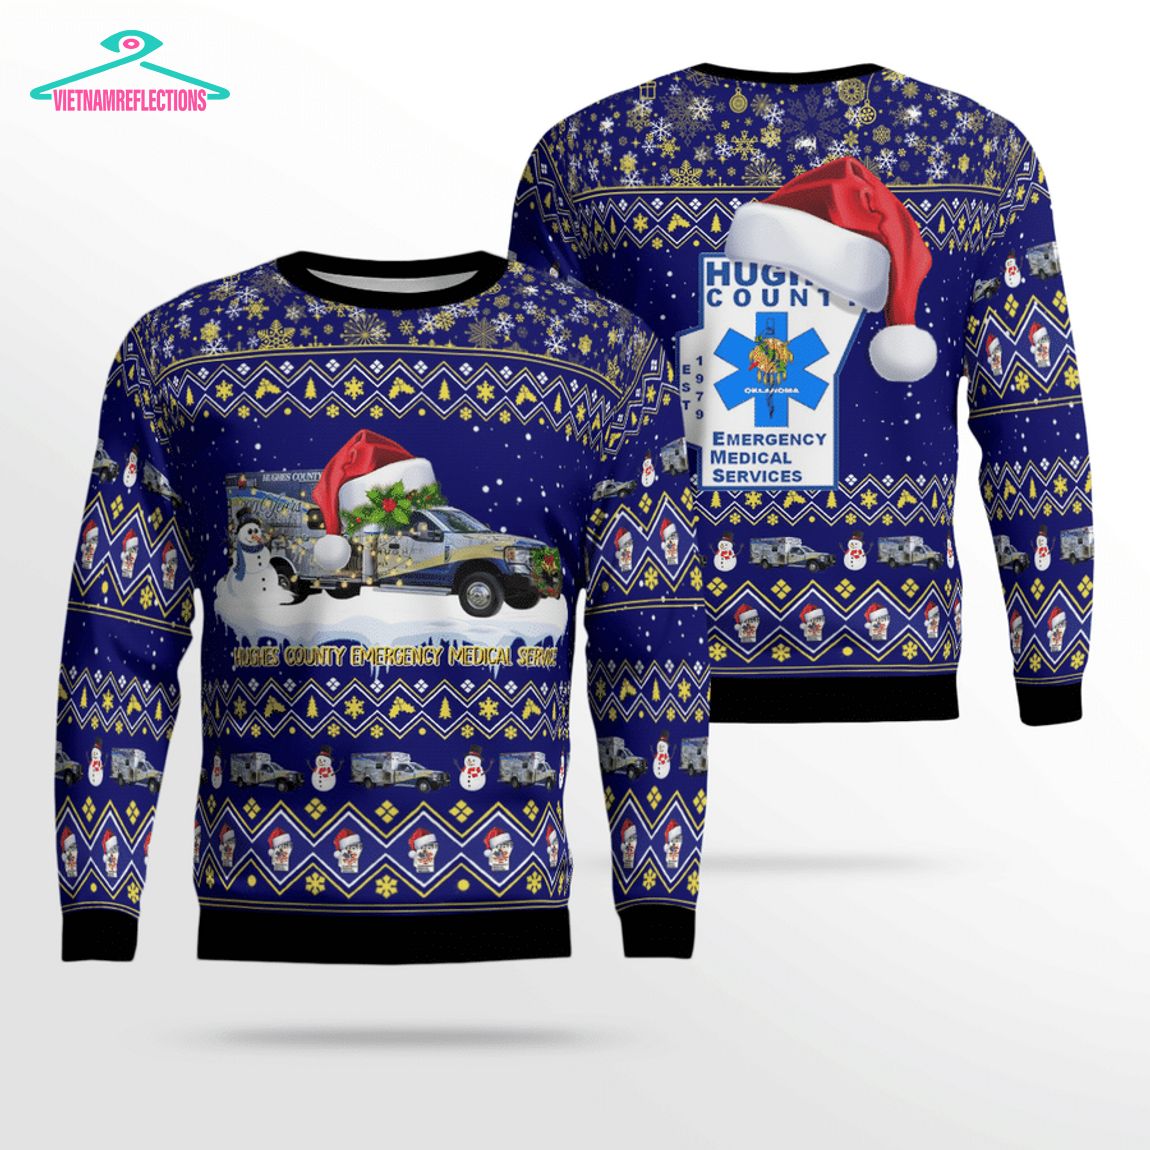 Hughes County EMS Ver 9 3D Christmas Sweater - Natural and awesome